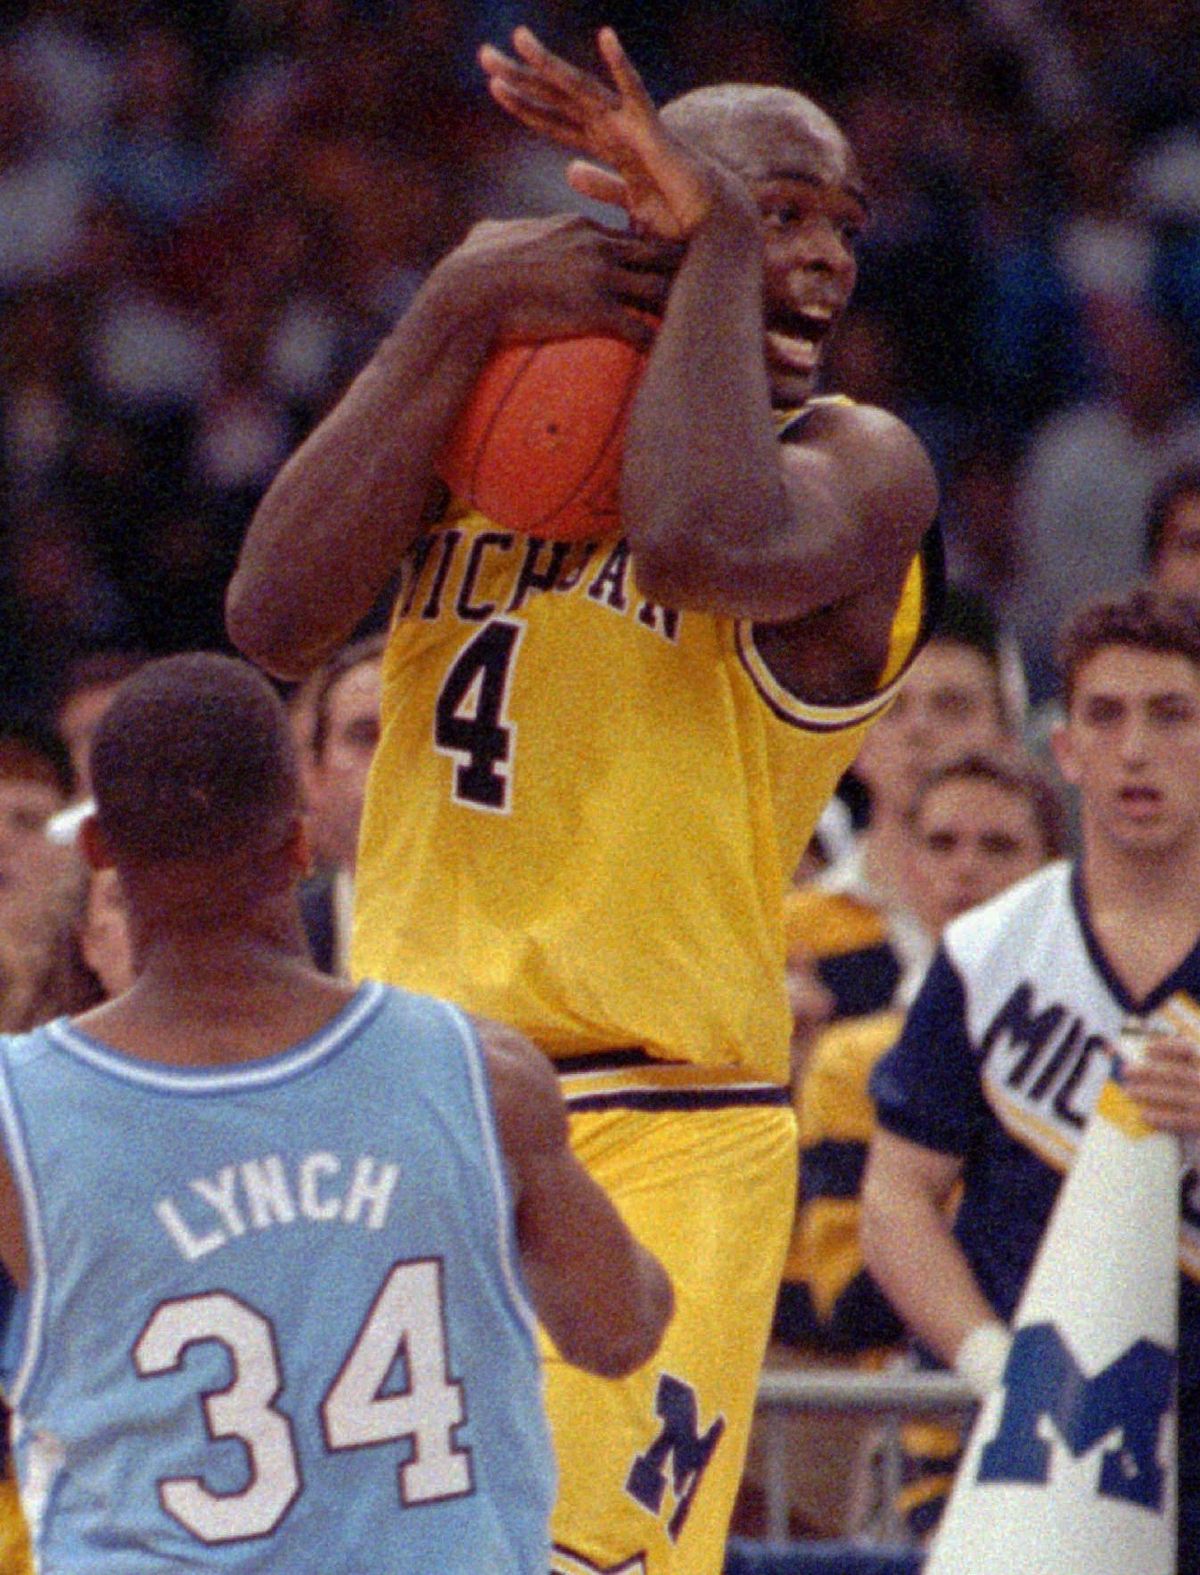 Chris Webber didn’t have a timeout to call in the 1993 NCAA title game and drew a technical foul. (Associated Press)